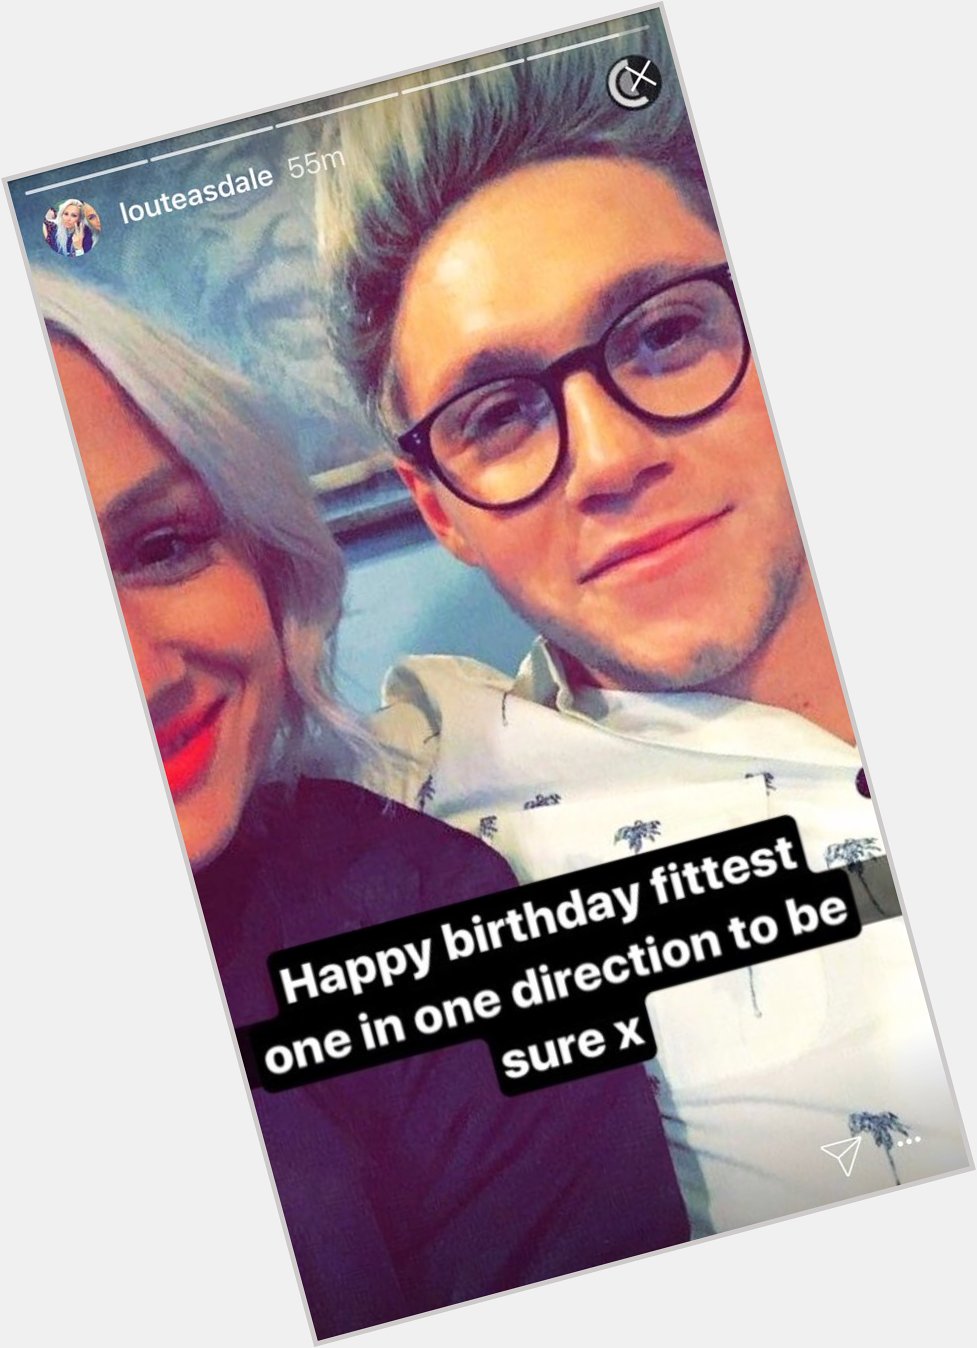  Happy birthday fittest one in one direction to be sure x
via Lou Teasdale\s IG story 